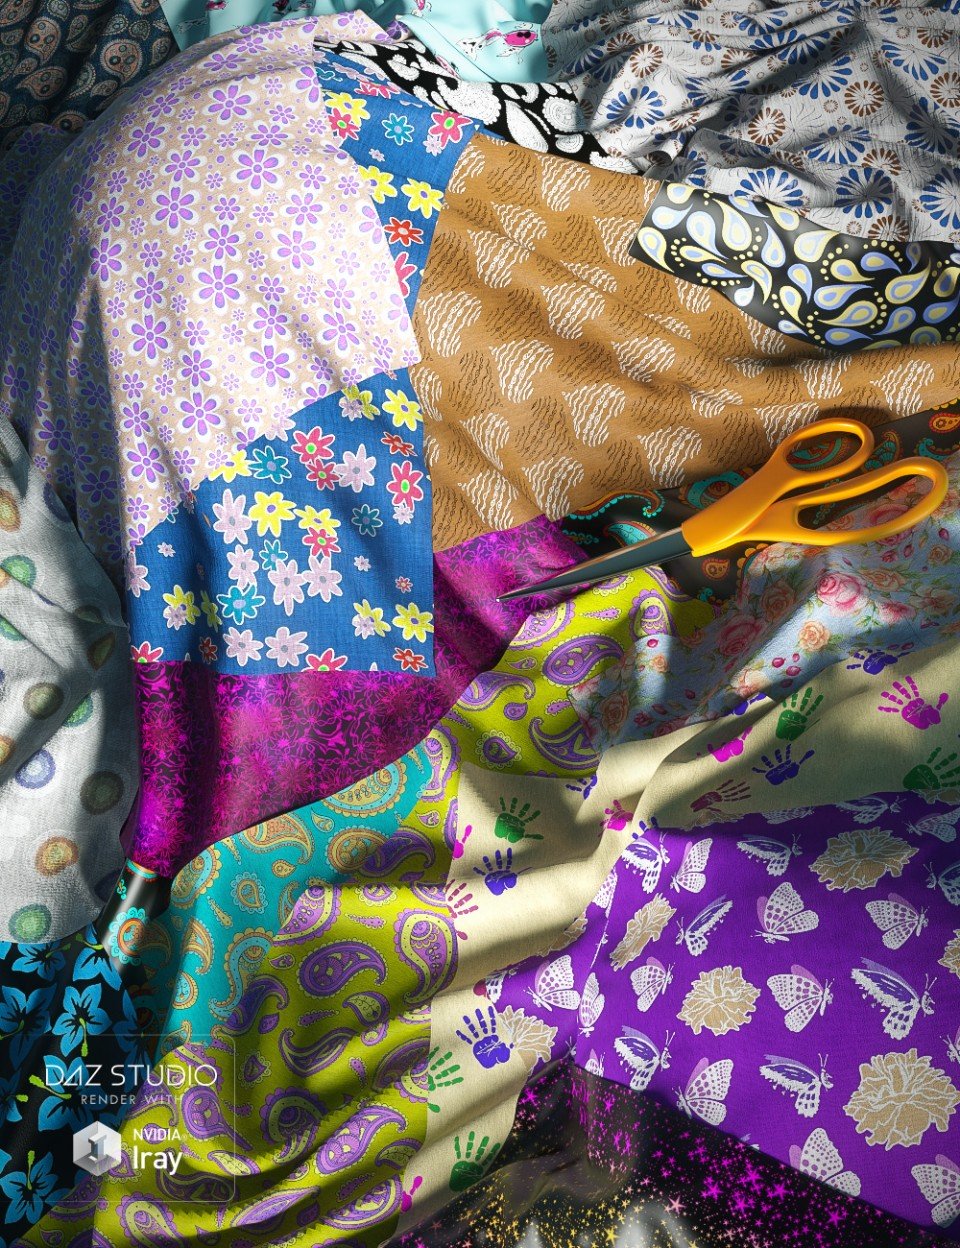 Paisley and Patterns Iray Shaders_DAZ3DDL